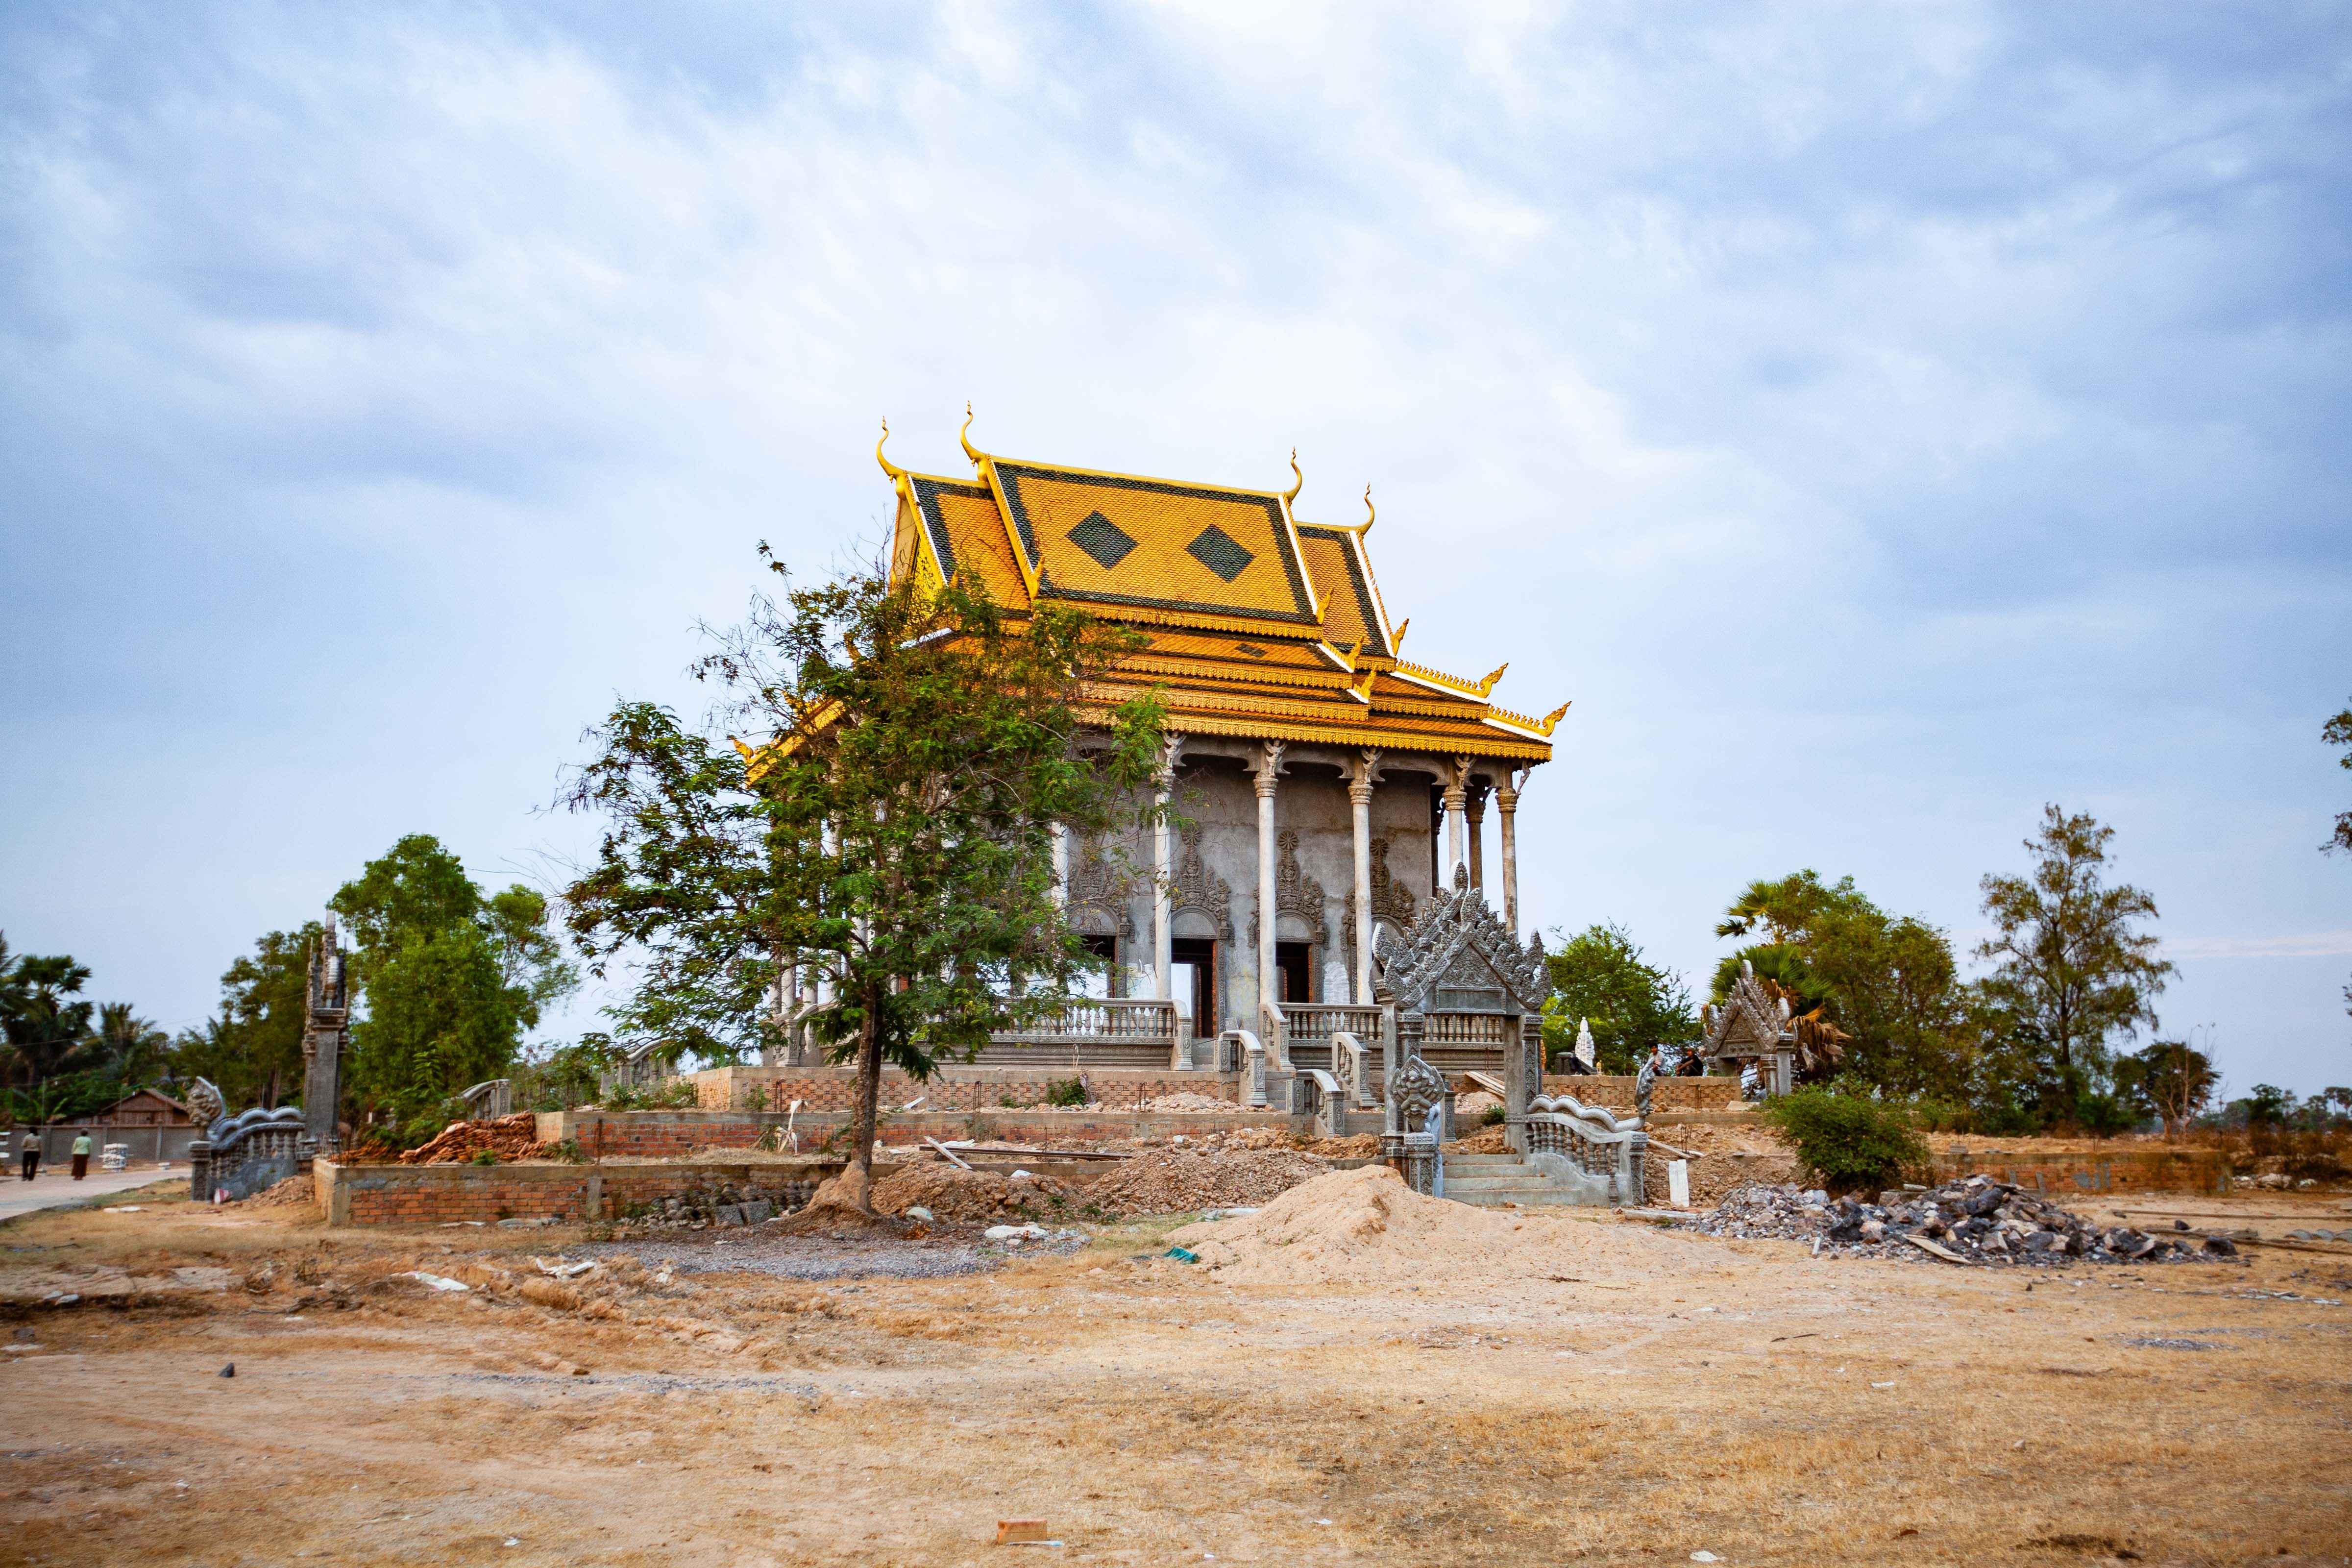 Cambodia, Pousaat Prov, Temple Under Construction, 2011, IMG 9593